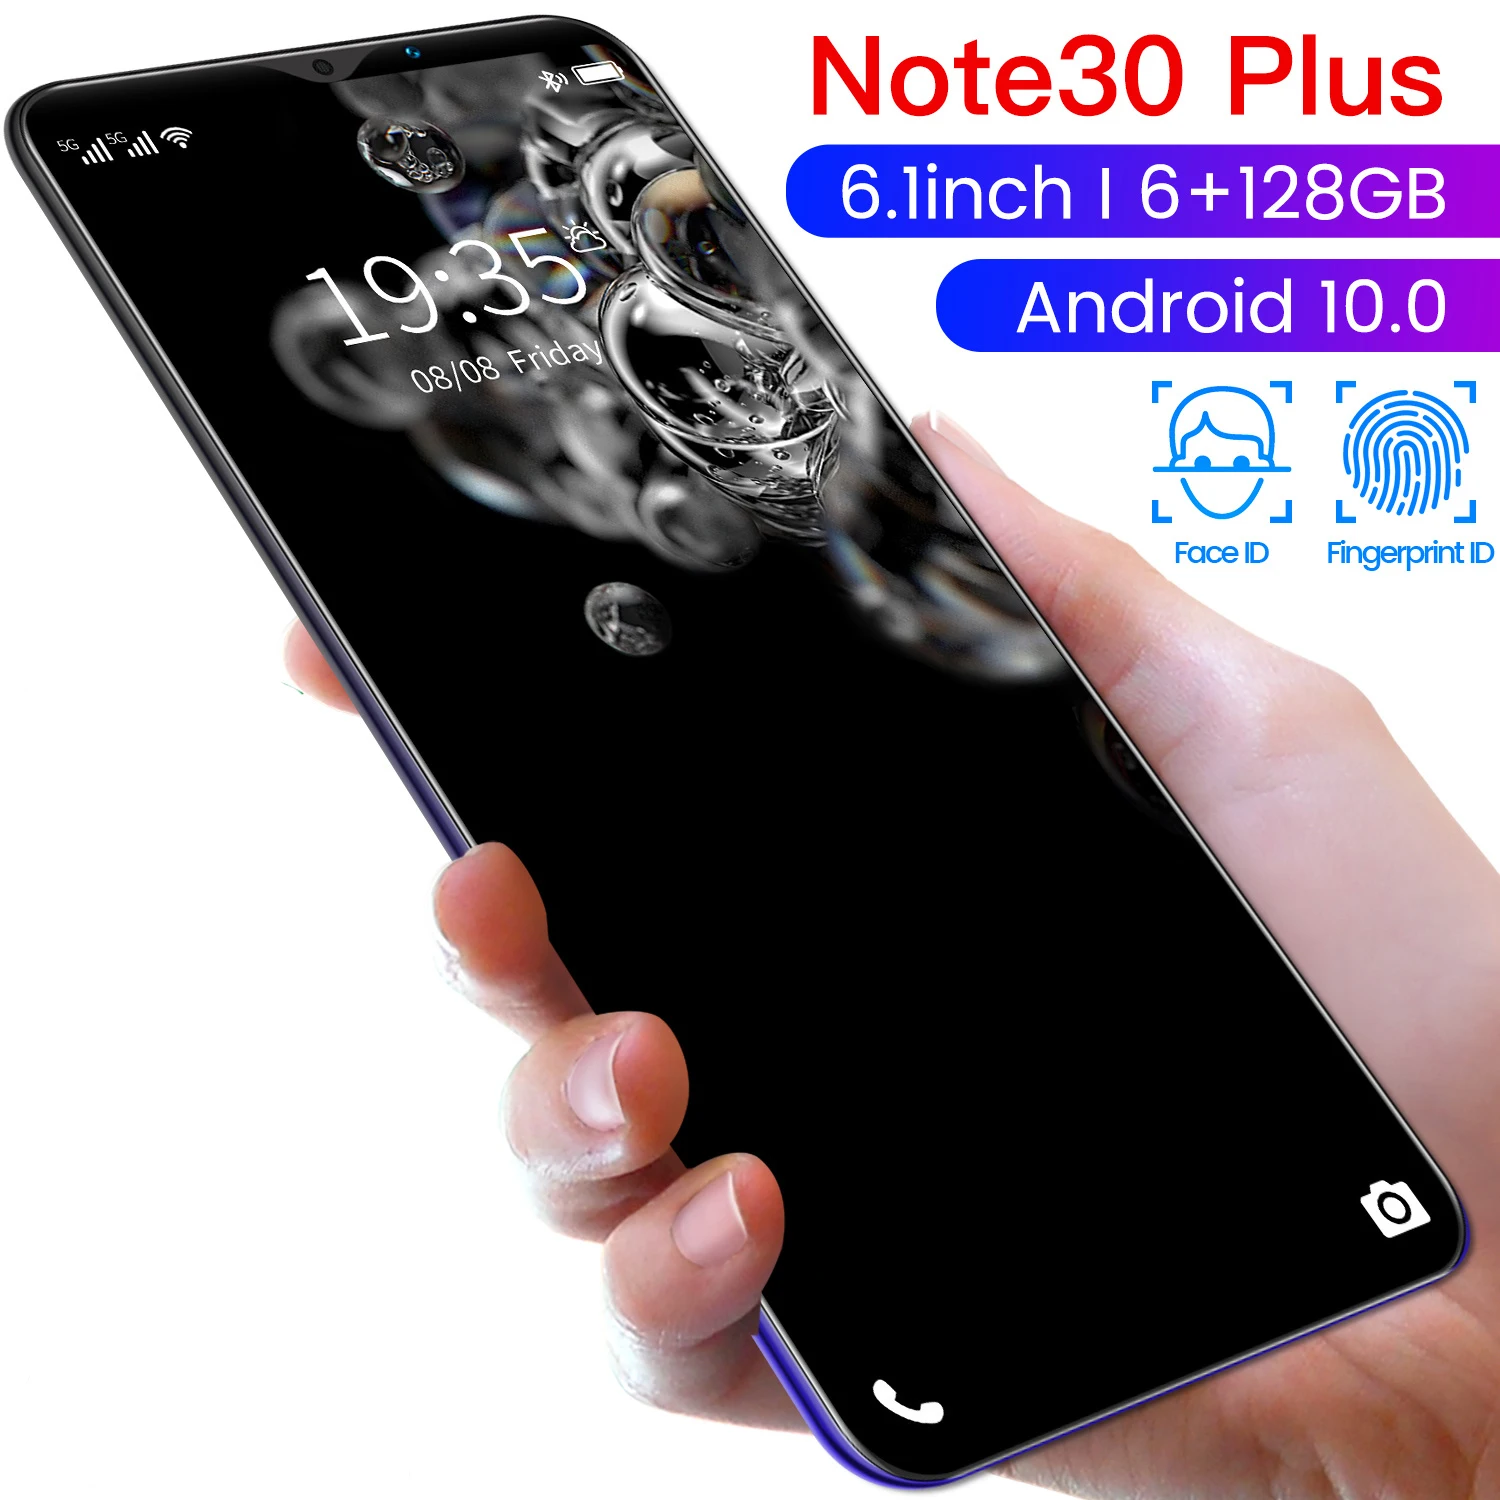 

Hot Sale Note30 Plus 5G mobile phones Deca core 6.1 inch full screen 6gb+128gb android 10.0 smartphone hot selling products